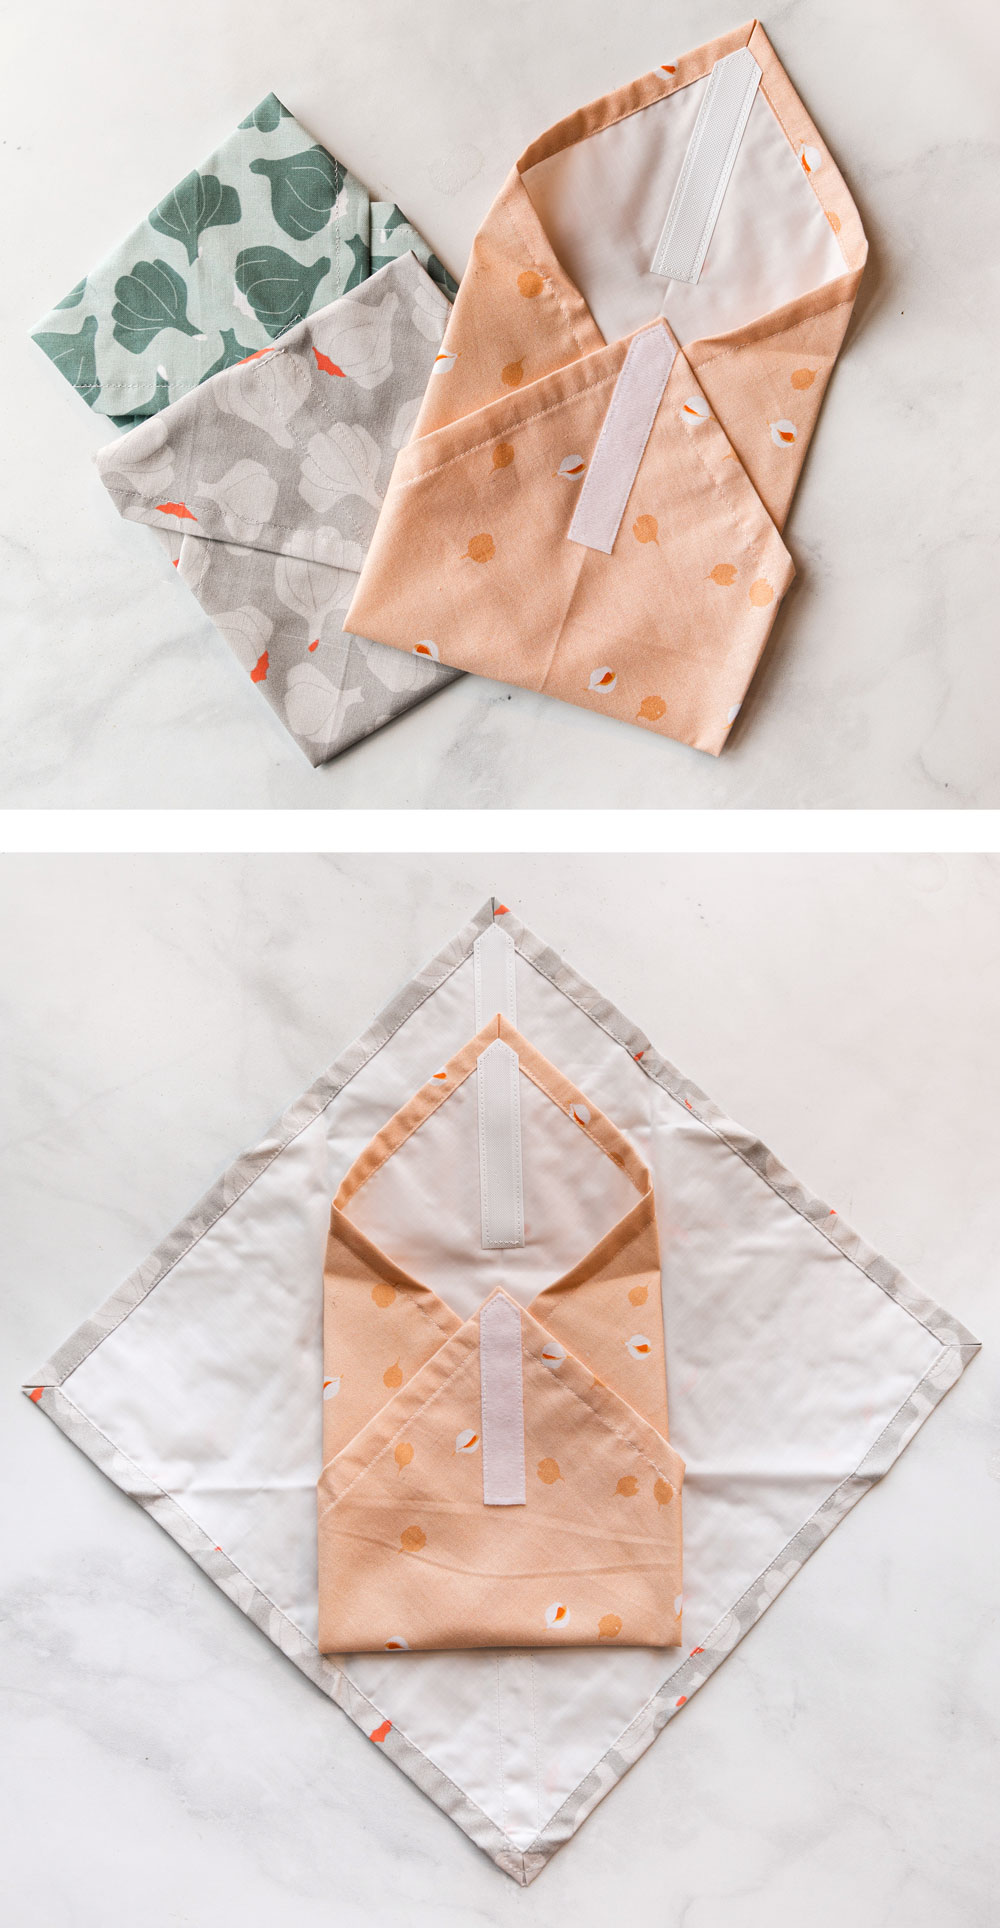 This DIY reusable sandwich wrap tutorial will help you become more green at home! A free scrap fabric pattern tutorial! suzyquilts.com #DIY #recycle